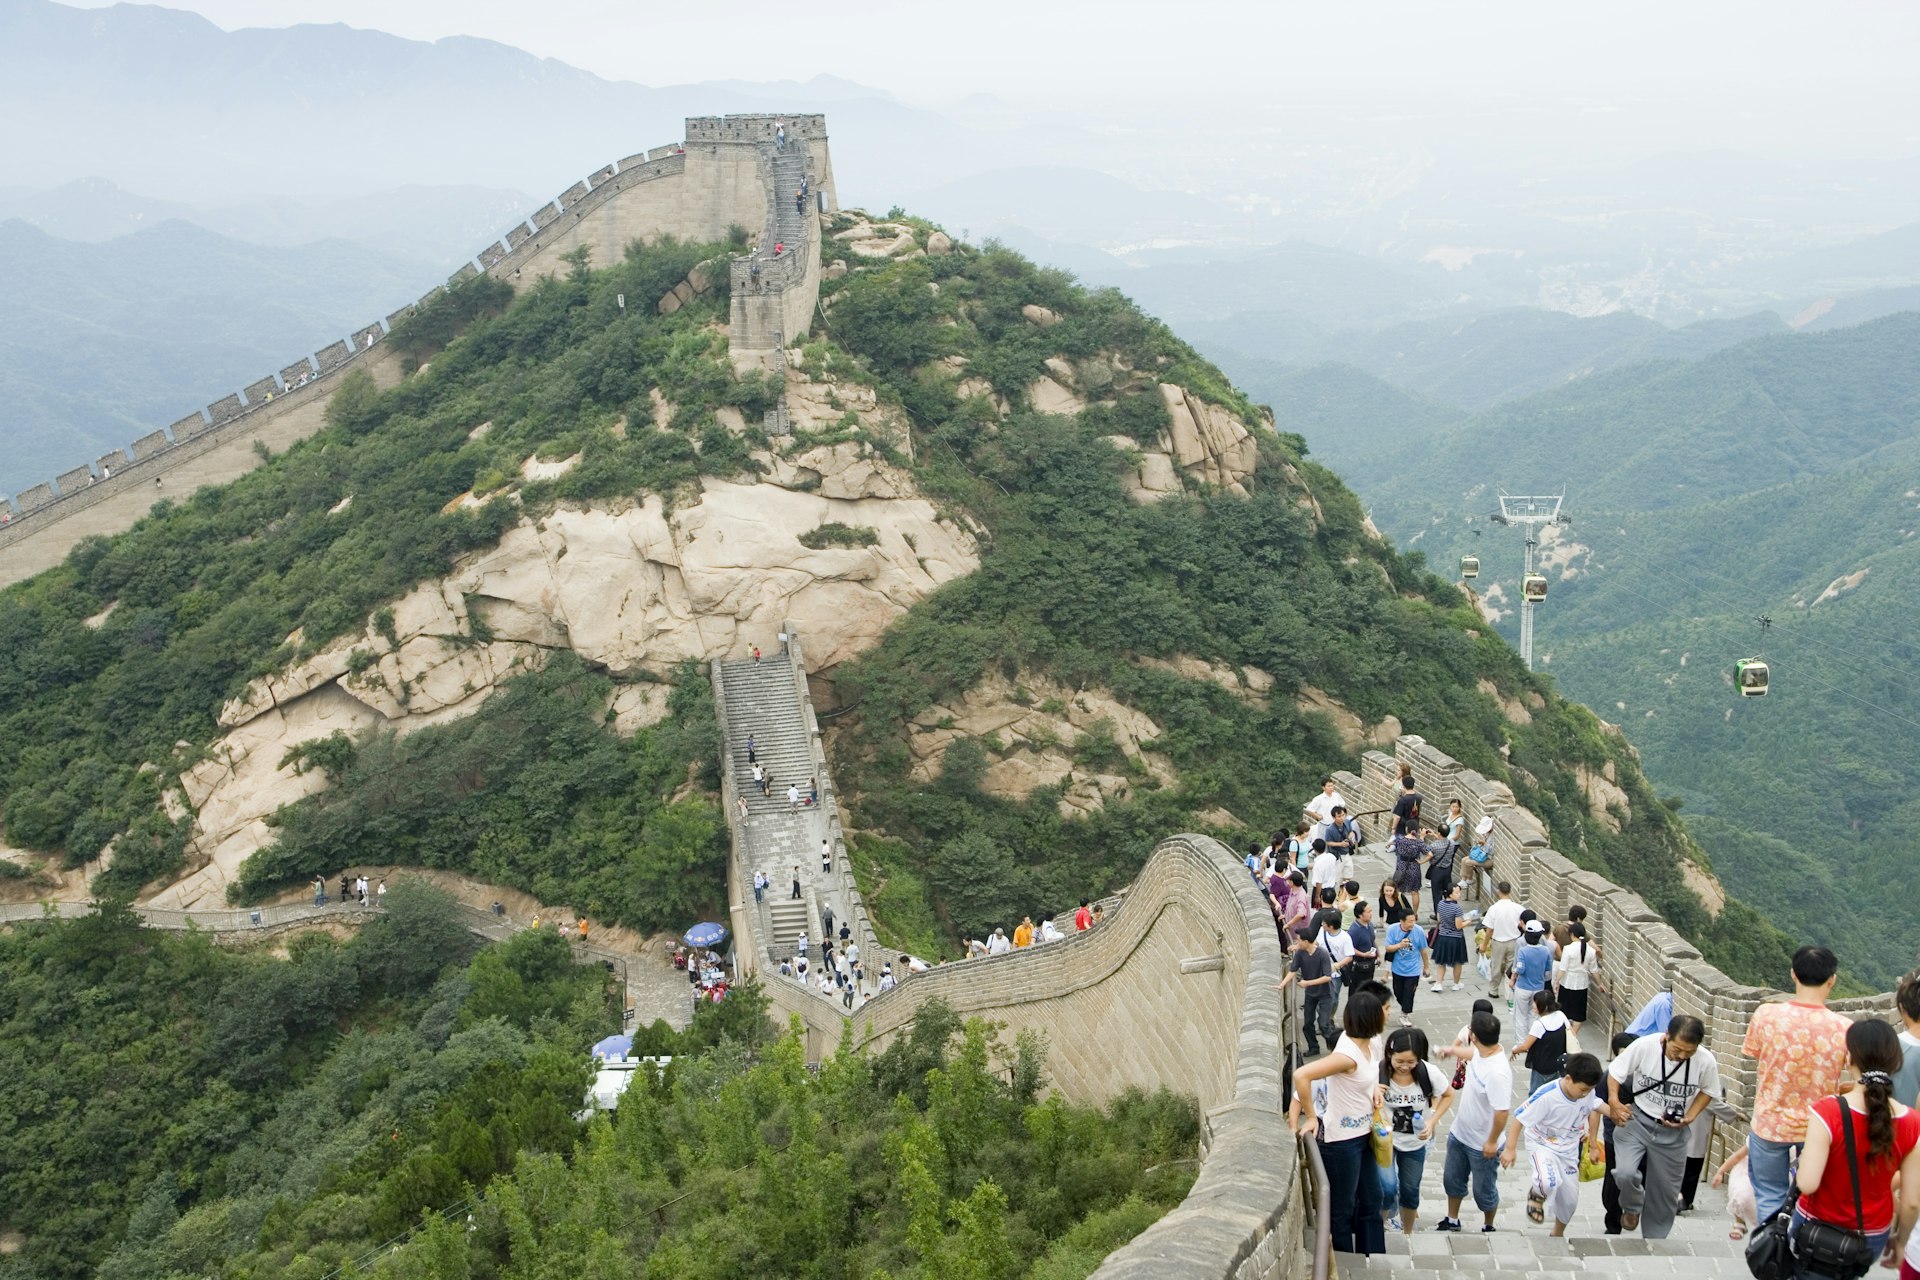 crowds at the Badaling section of the Great Wall